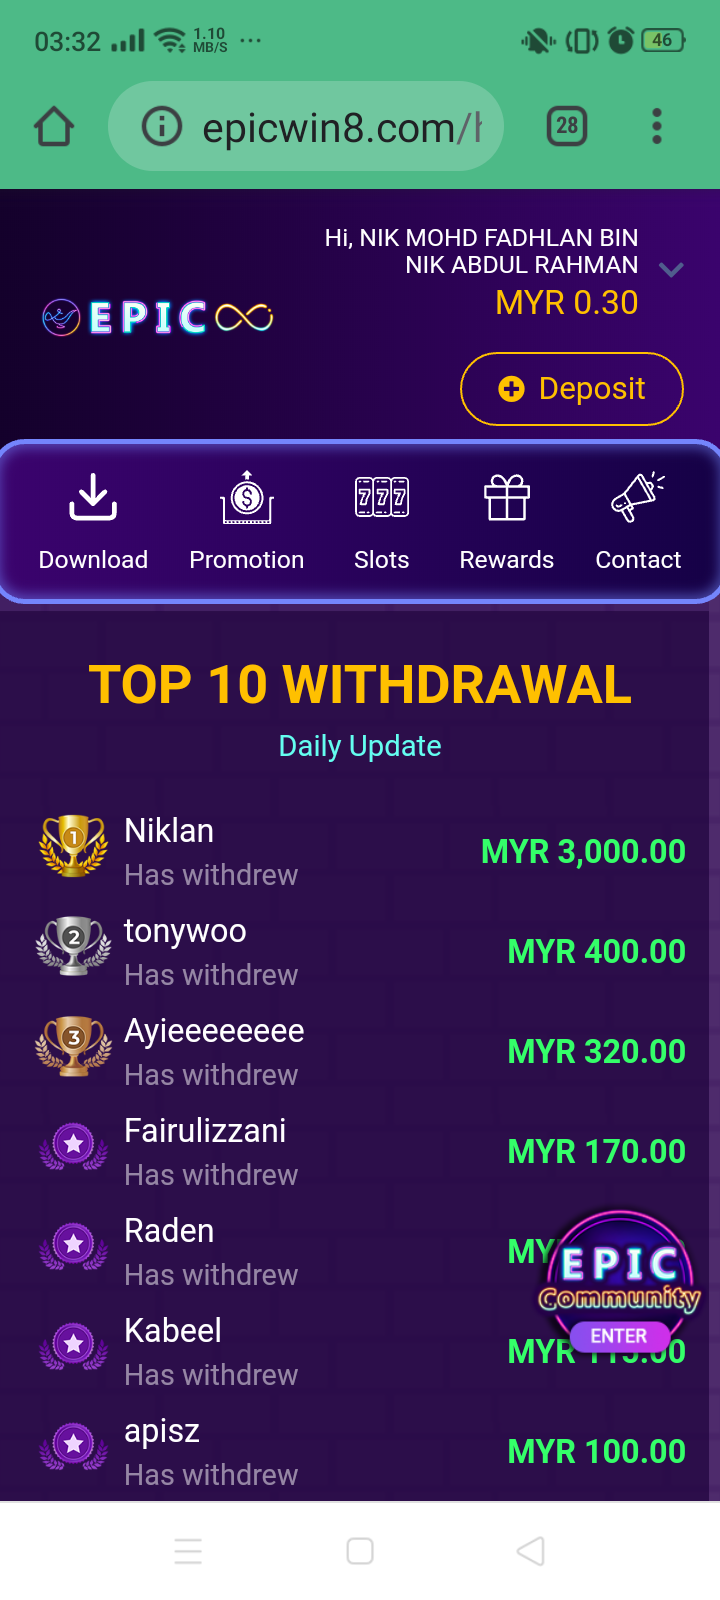 I got no 1 in TOP 10 For high withdraw and SUPER DUPERR EPICWIN WINNERS...IN EPICWIN8